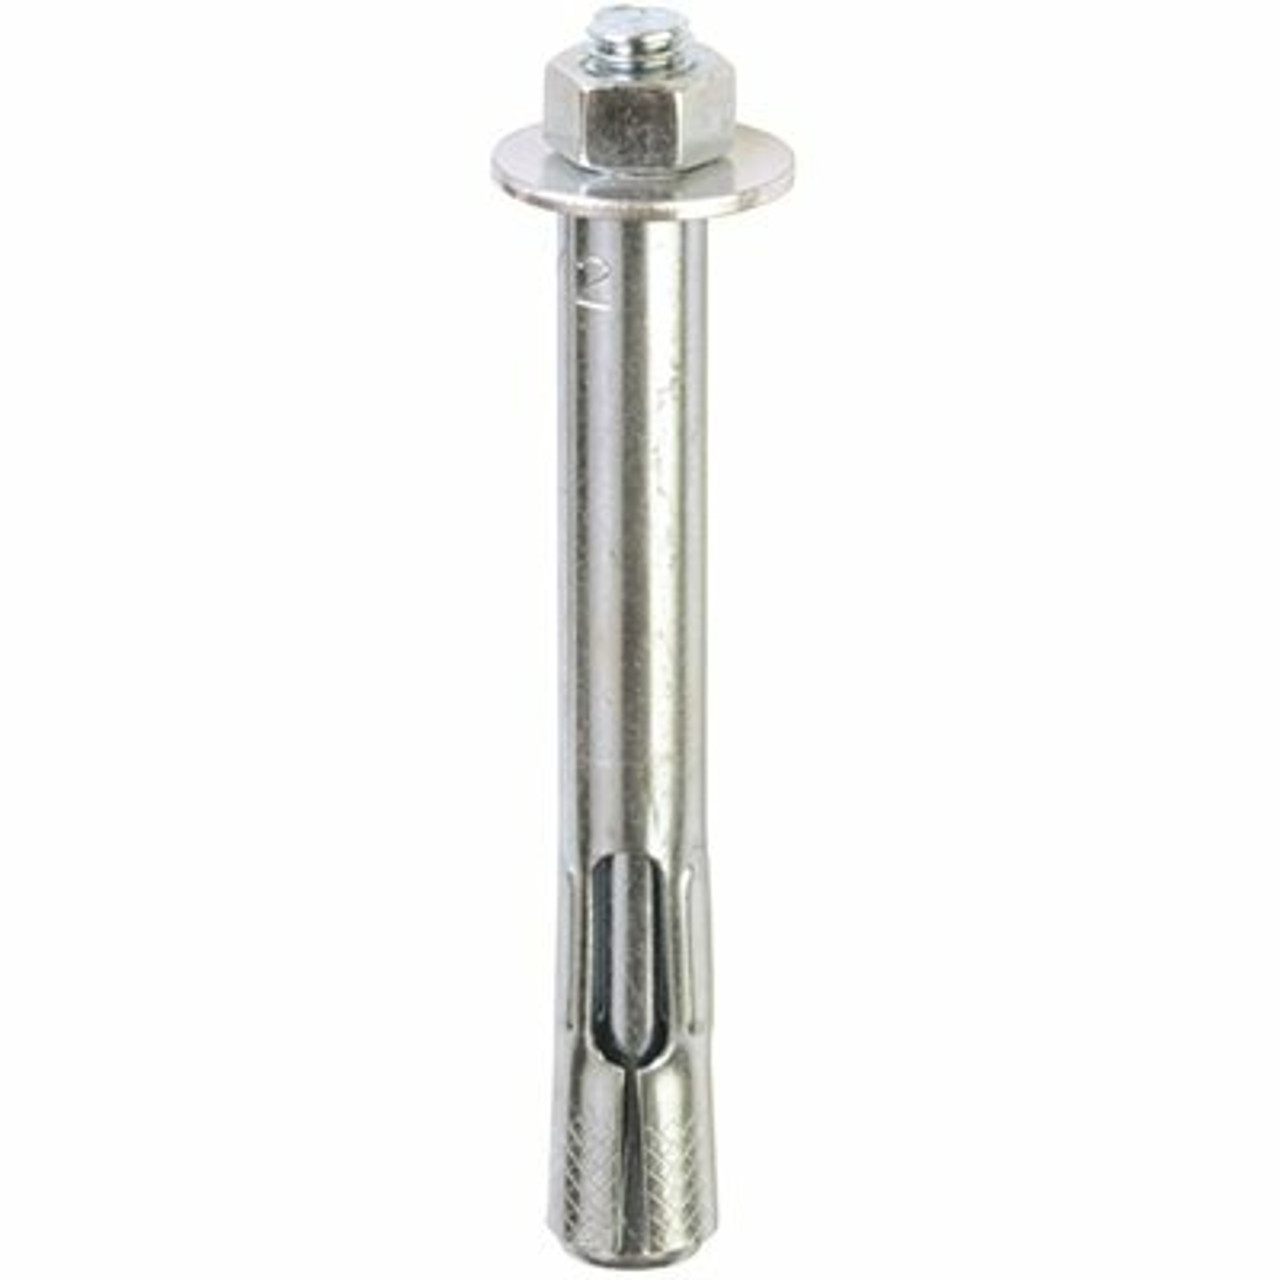 Red Head 3/8 In. X 3 In. Zinc-Plated Steel Hex Head Sleeve Anchors (50-Pack)